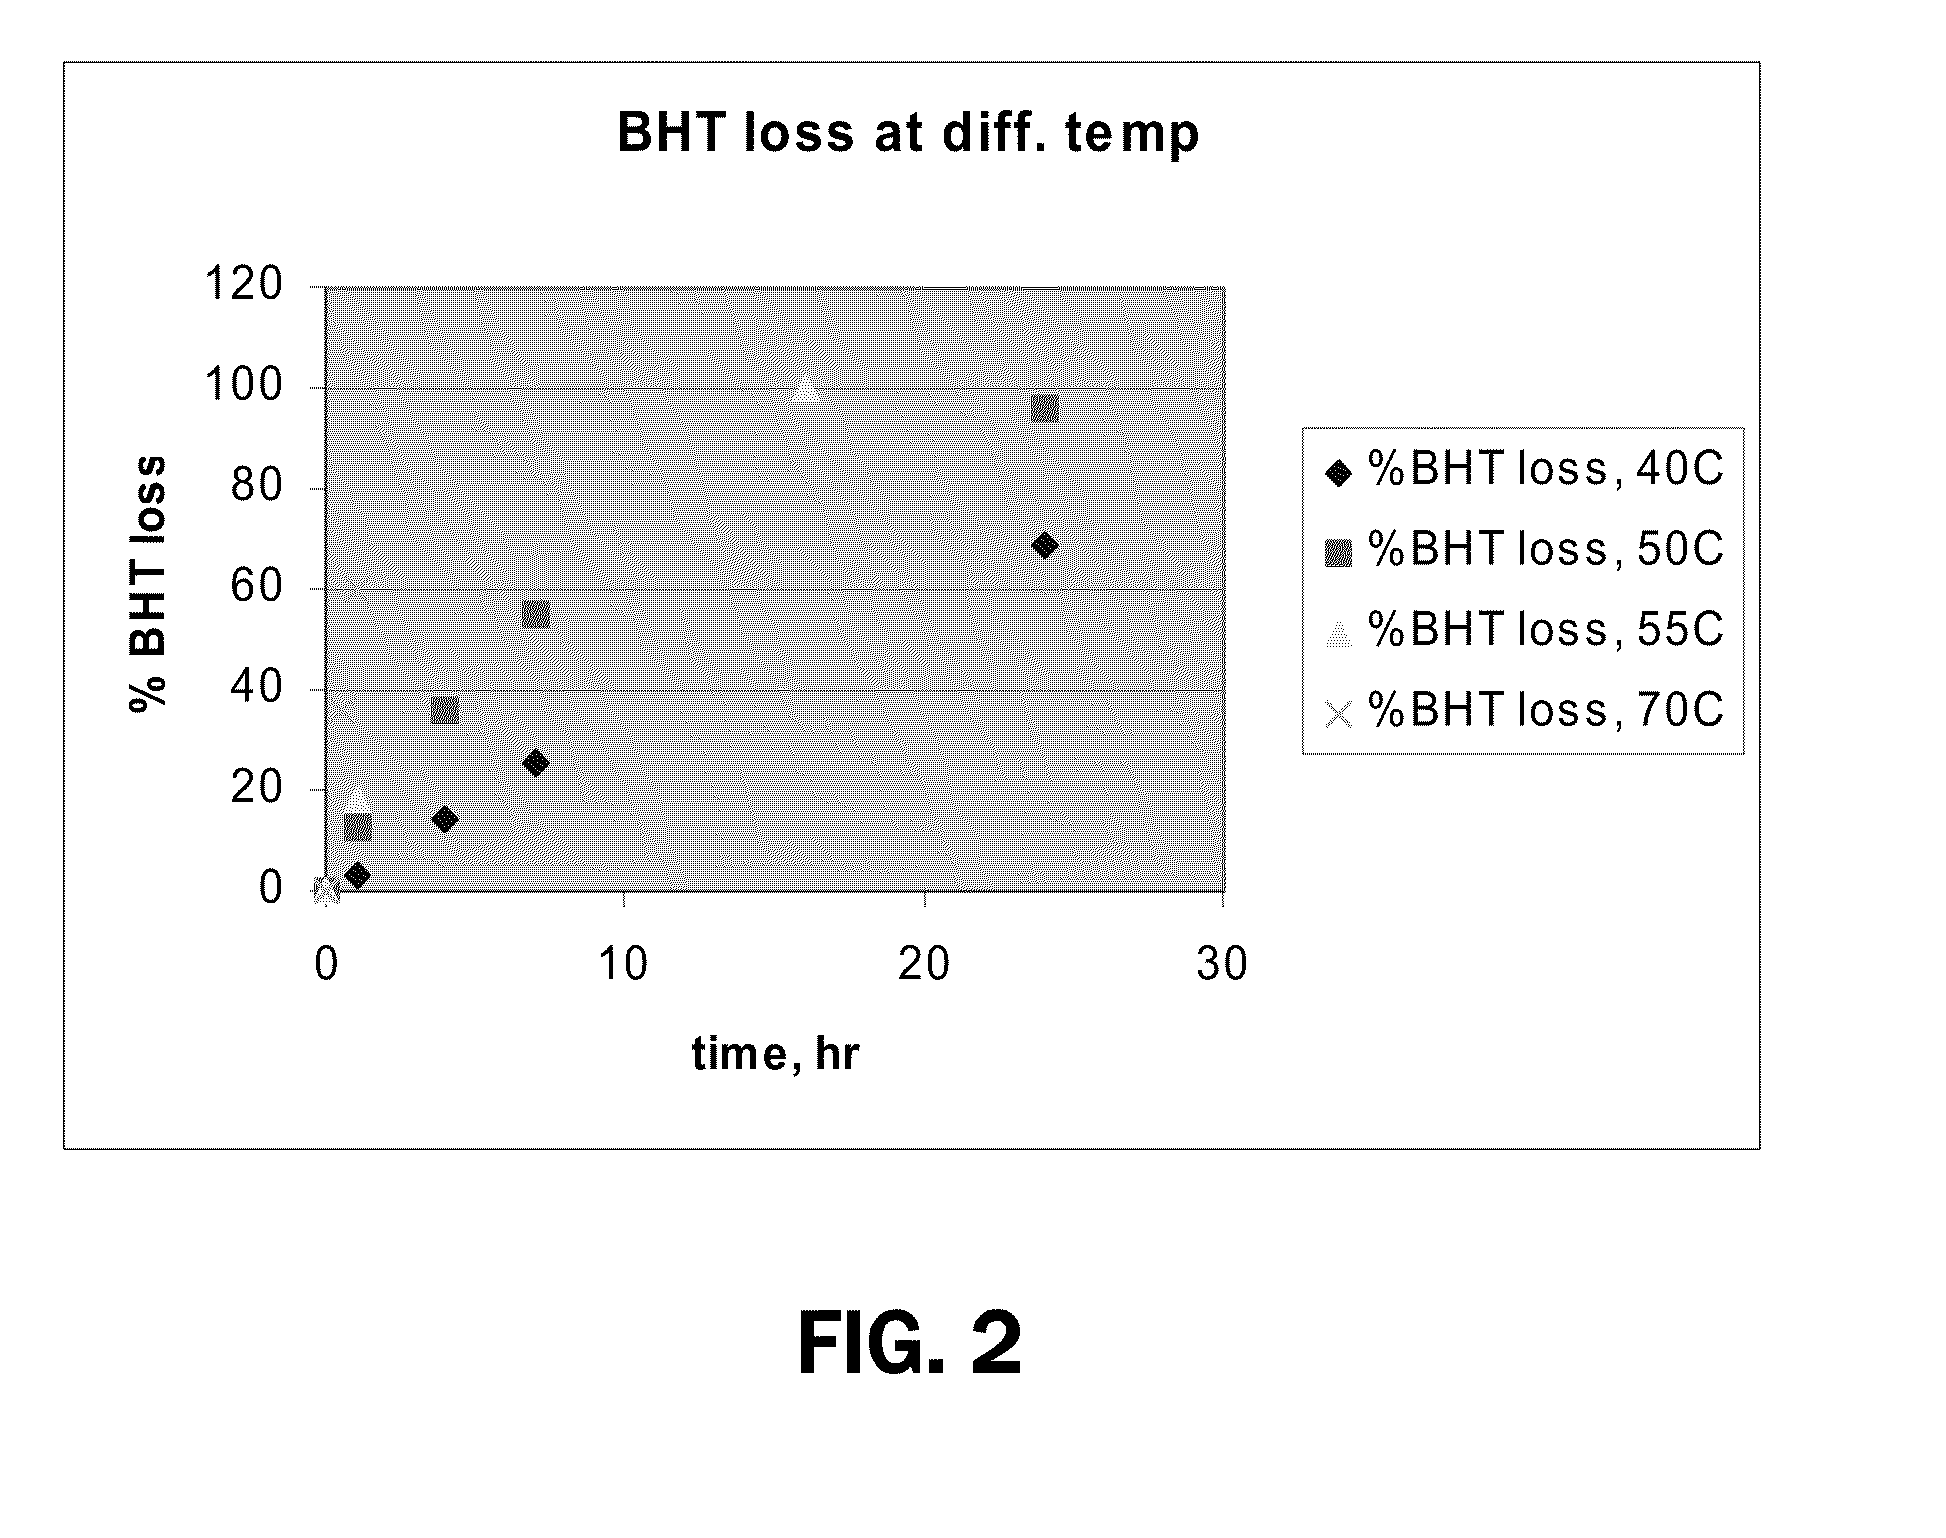 Methods Of Providing Antioxidants To Implantable Medical Devices